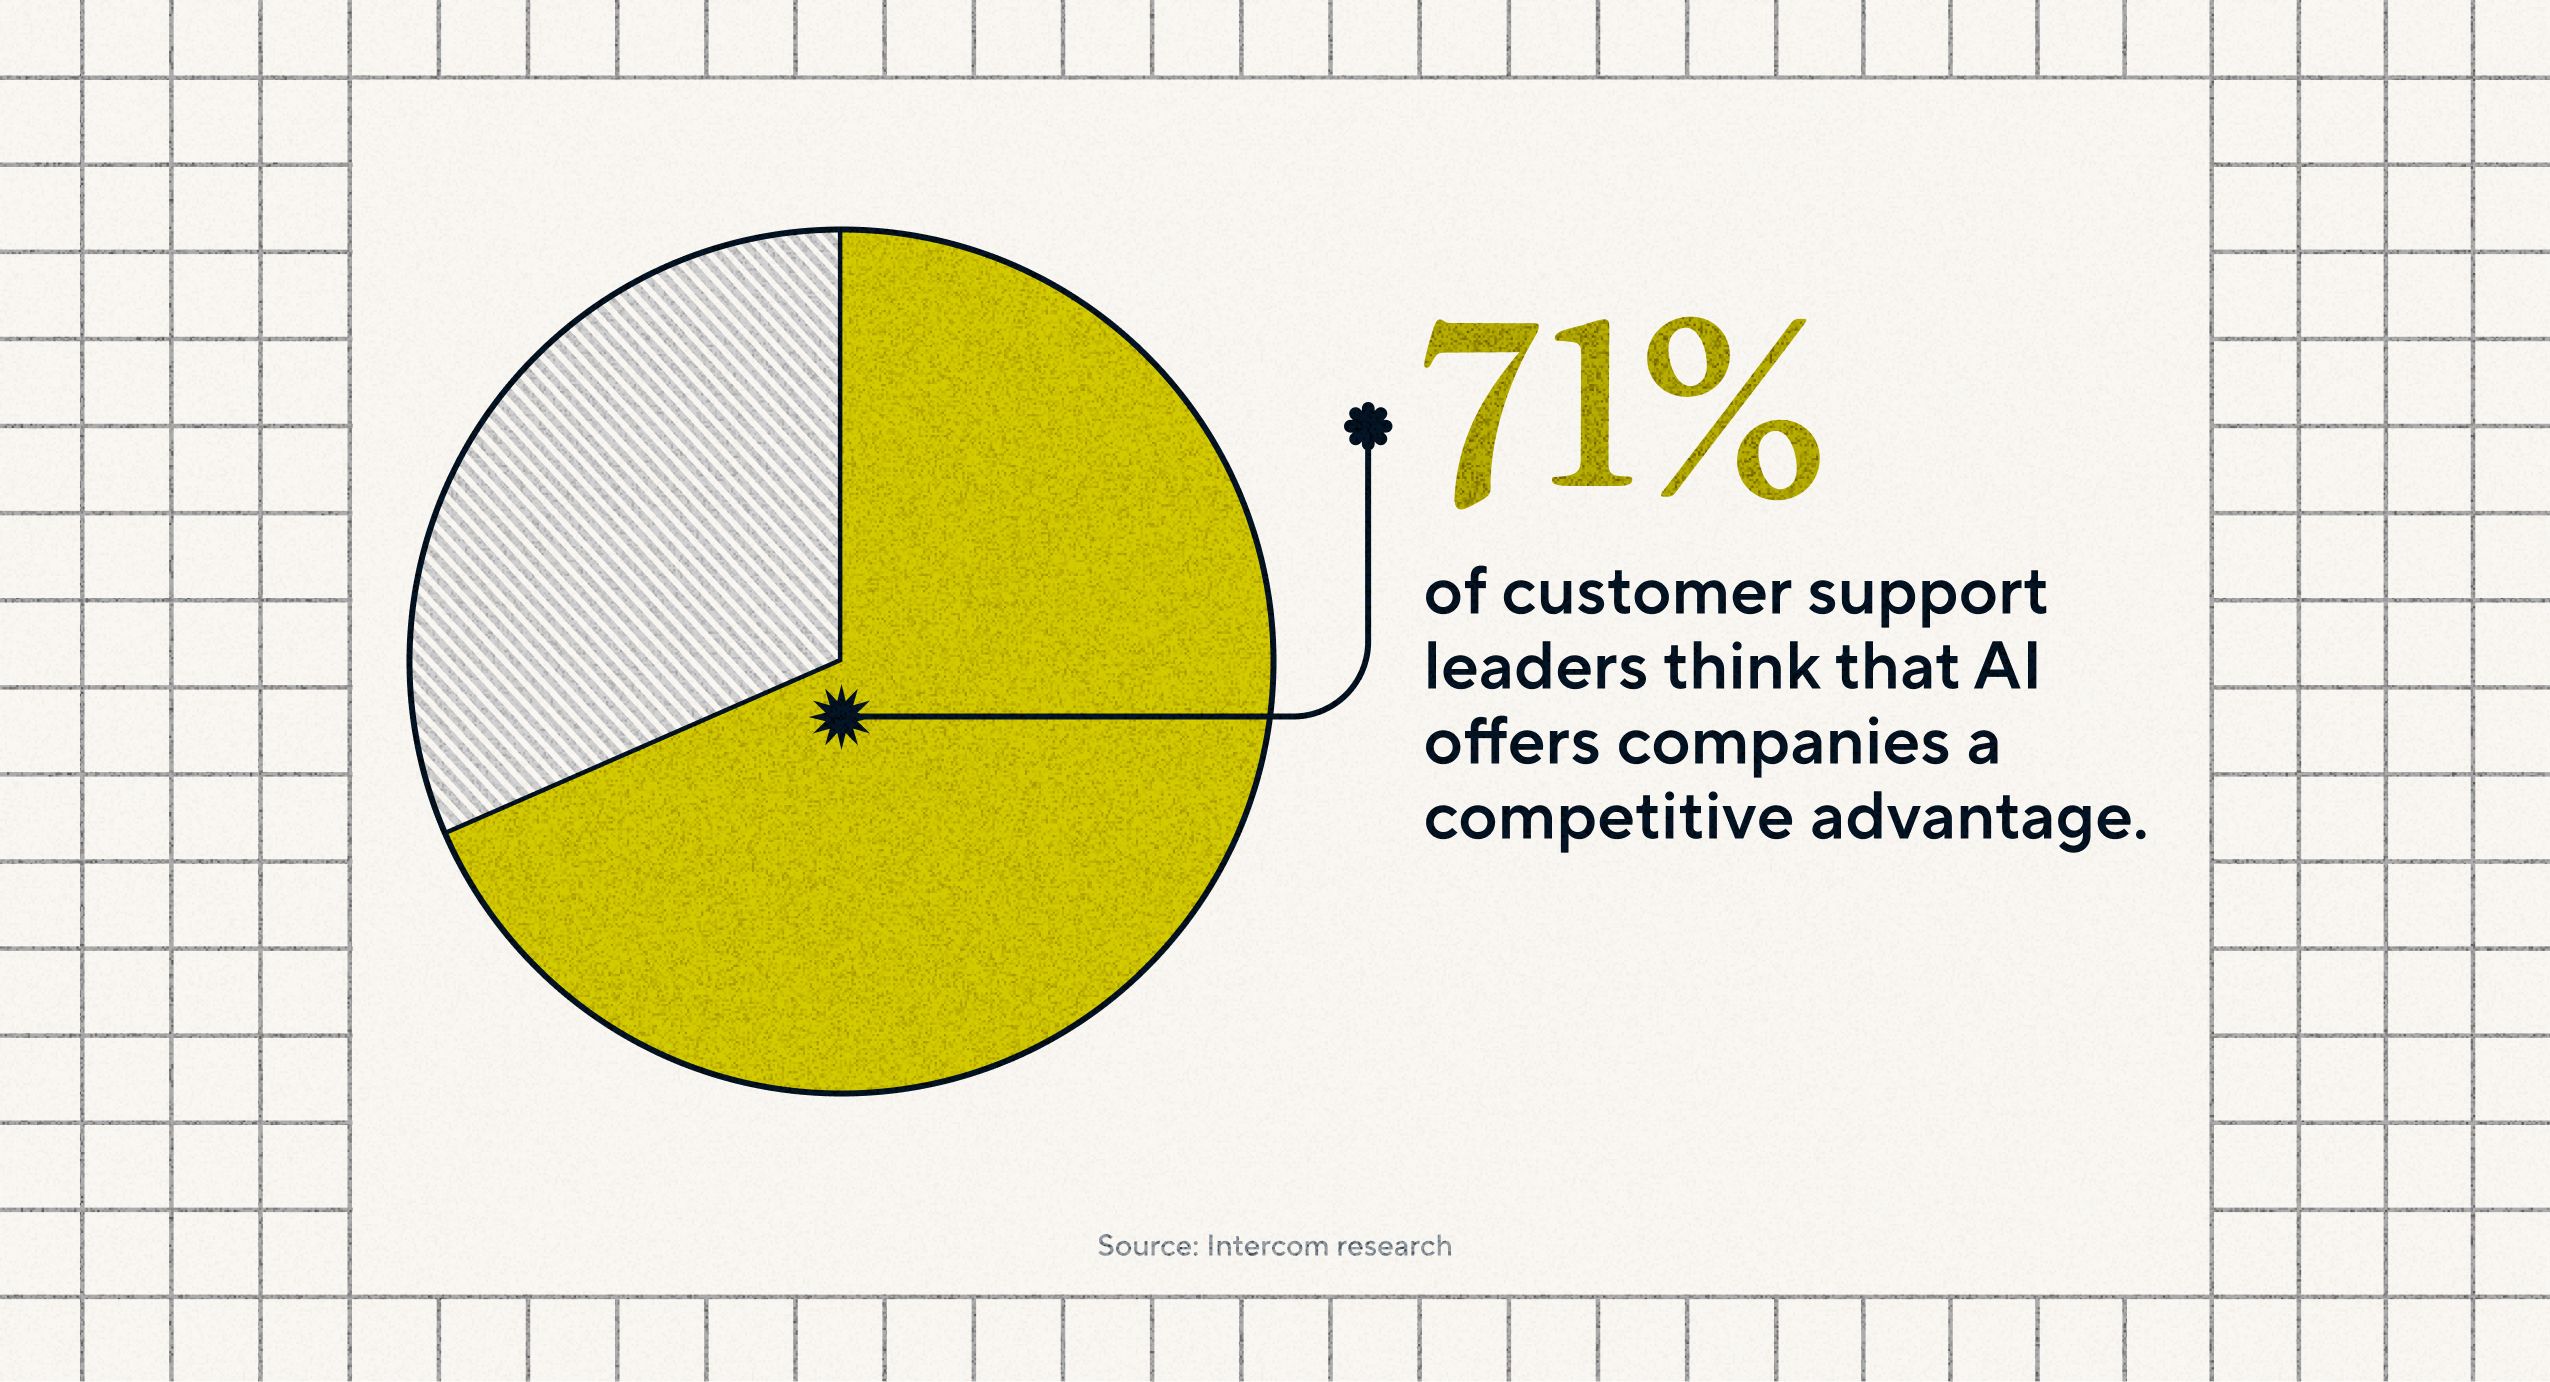 71% of customer support leaders think that AI offers companies a competitive advantage.